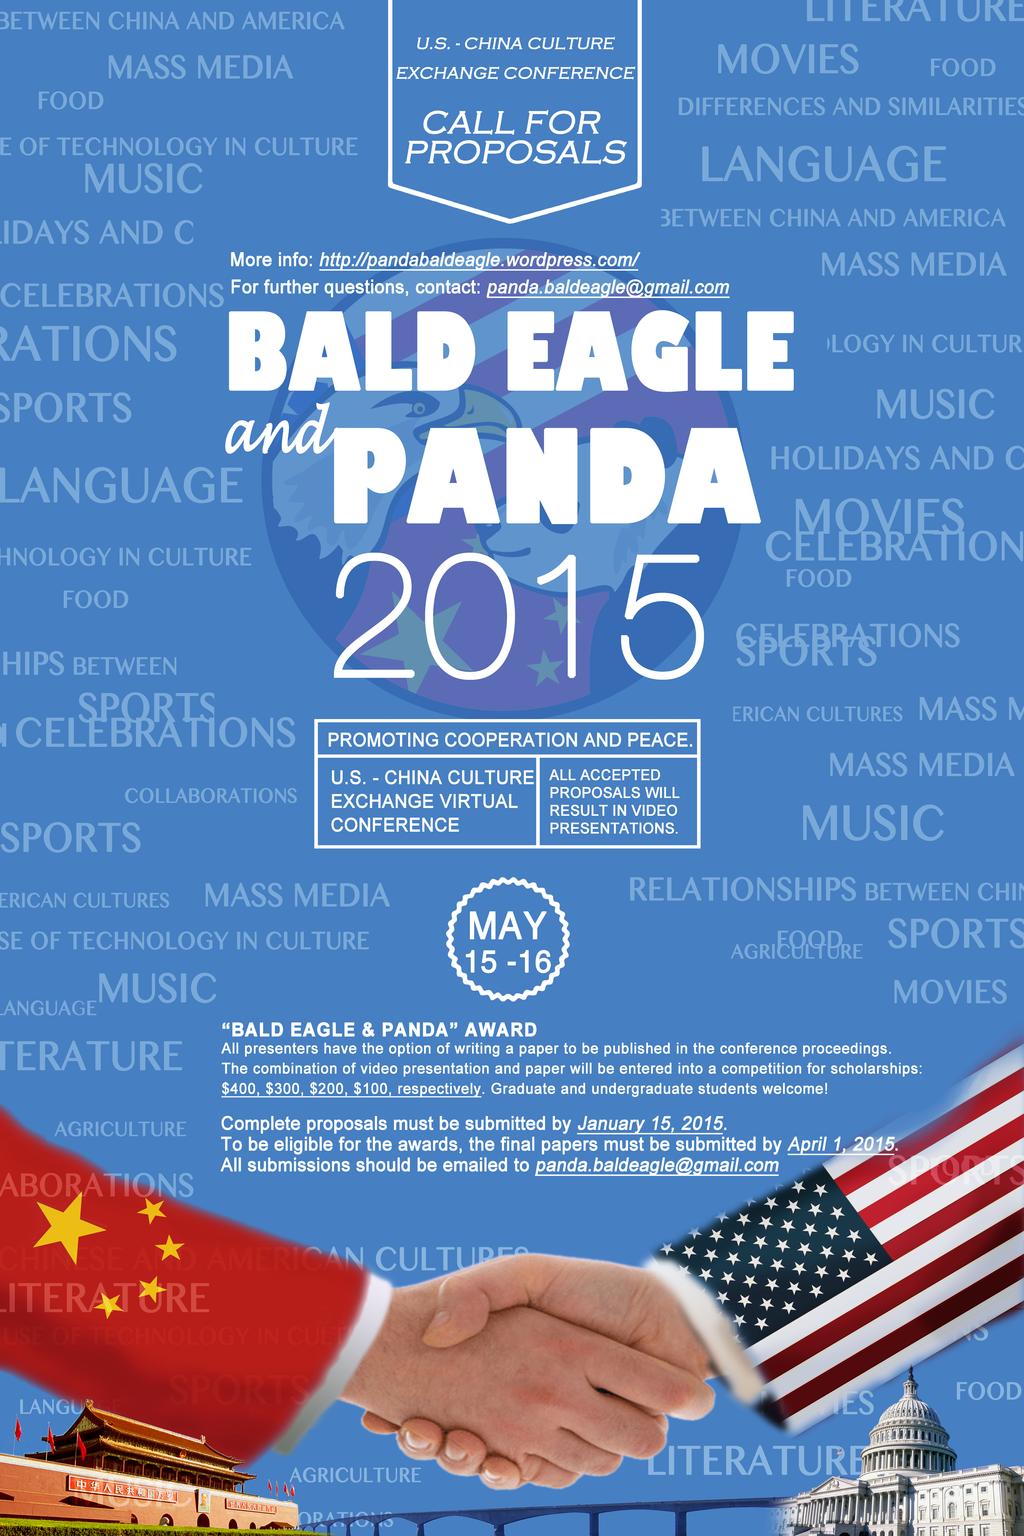 IOWA STATE UNIVERSITY February 2015 Up-coming Event Issue 1 The second annual Bald Eagle & Eagle and Panda Virtual Conference will be held on May 15-16, 2015 hosted by Iowa State University.